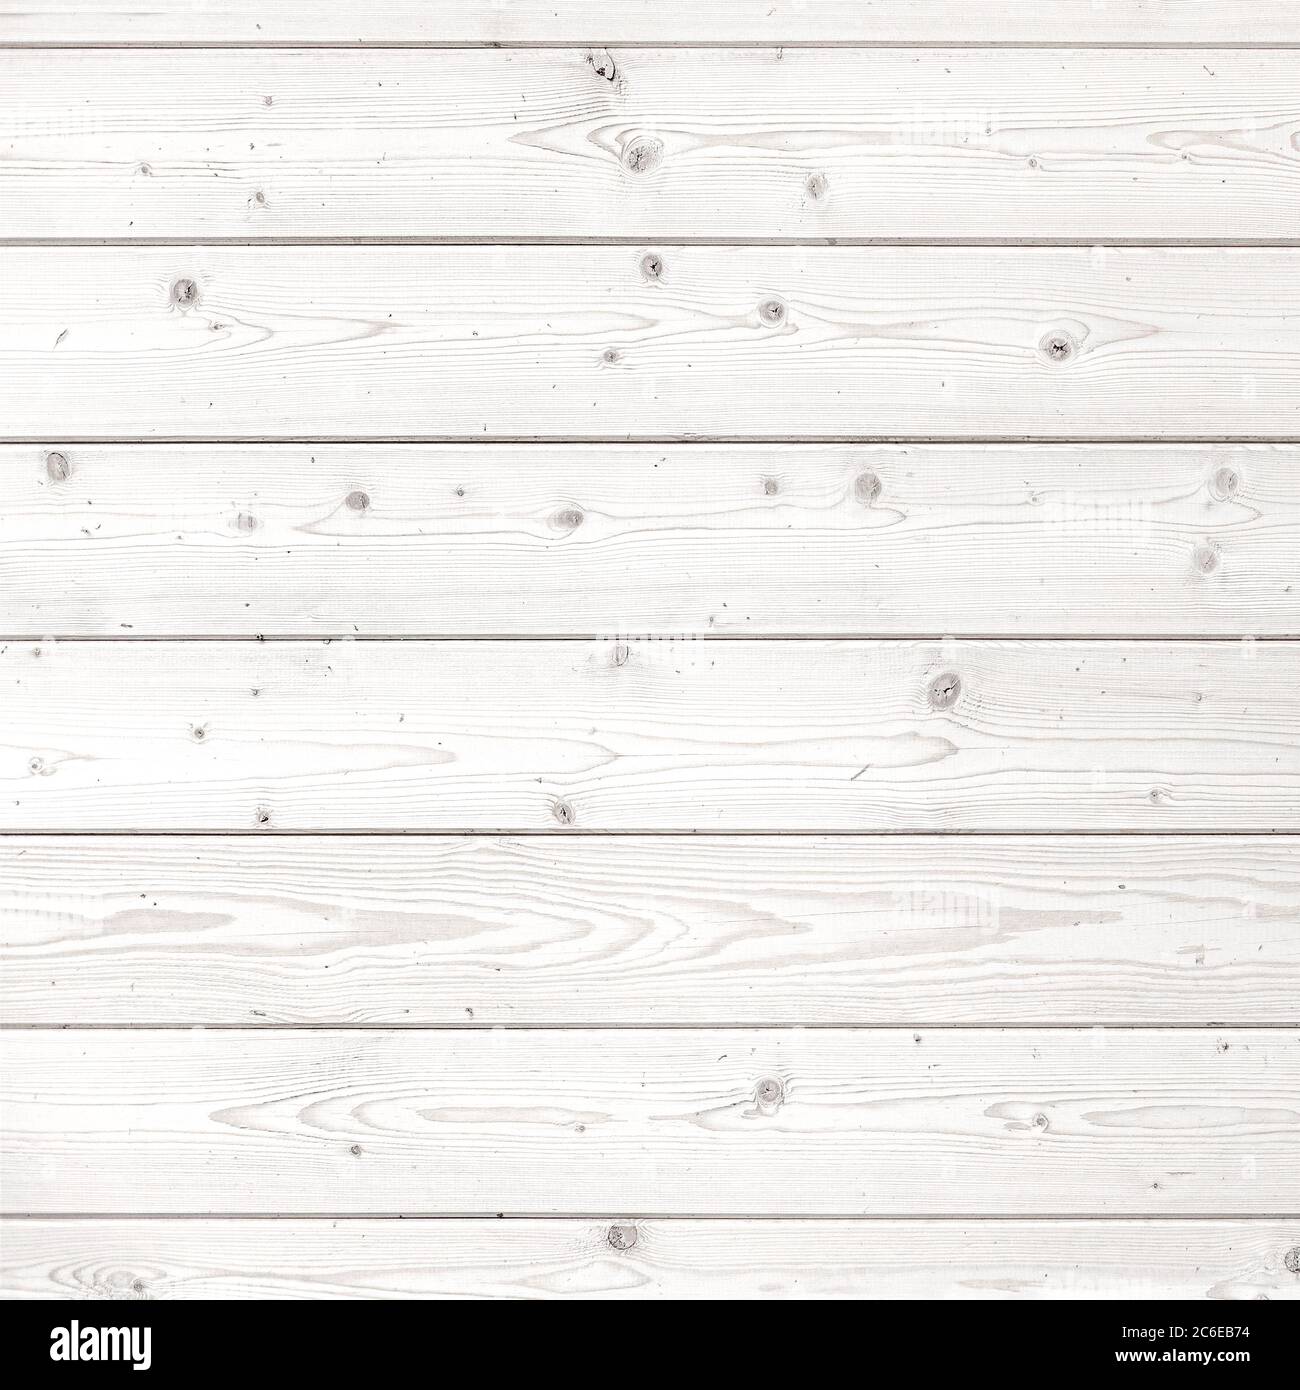 White Wood Vintage Mockup White Wooden Plank Background Texture Backdrop Wallpaper Surface Light Wood Empty Copy Space Show Text Or Product De Stock Photo Alamy